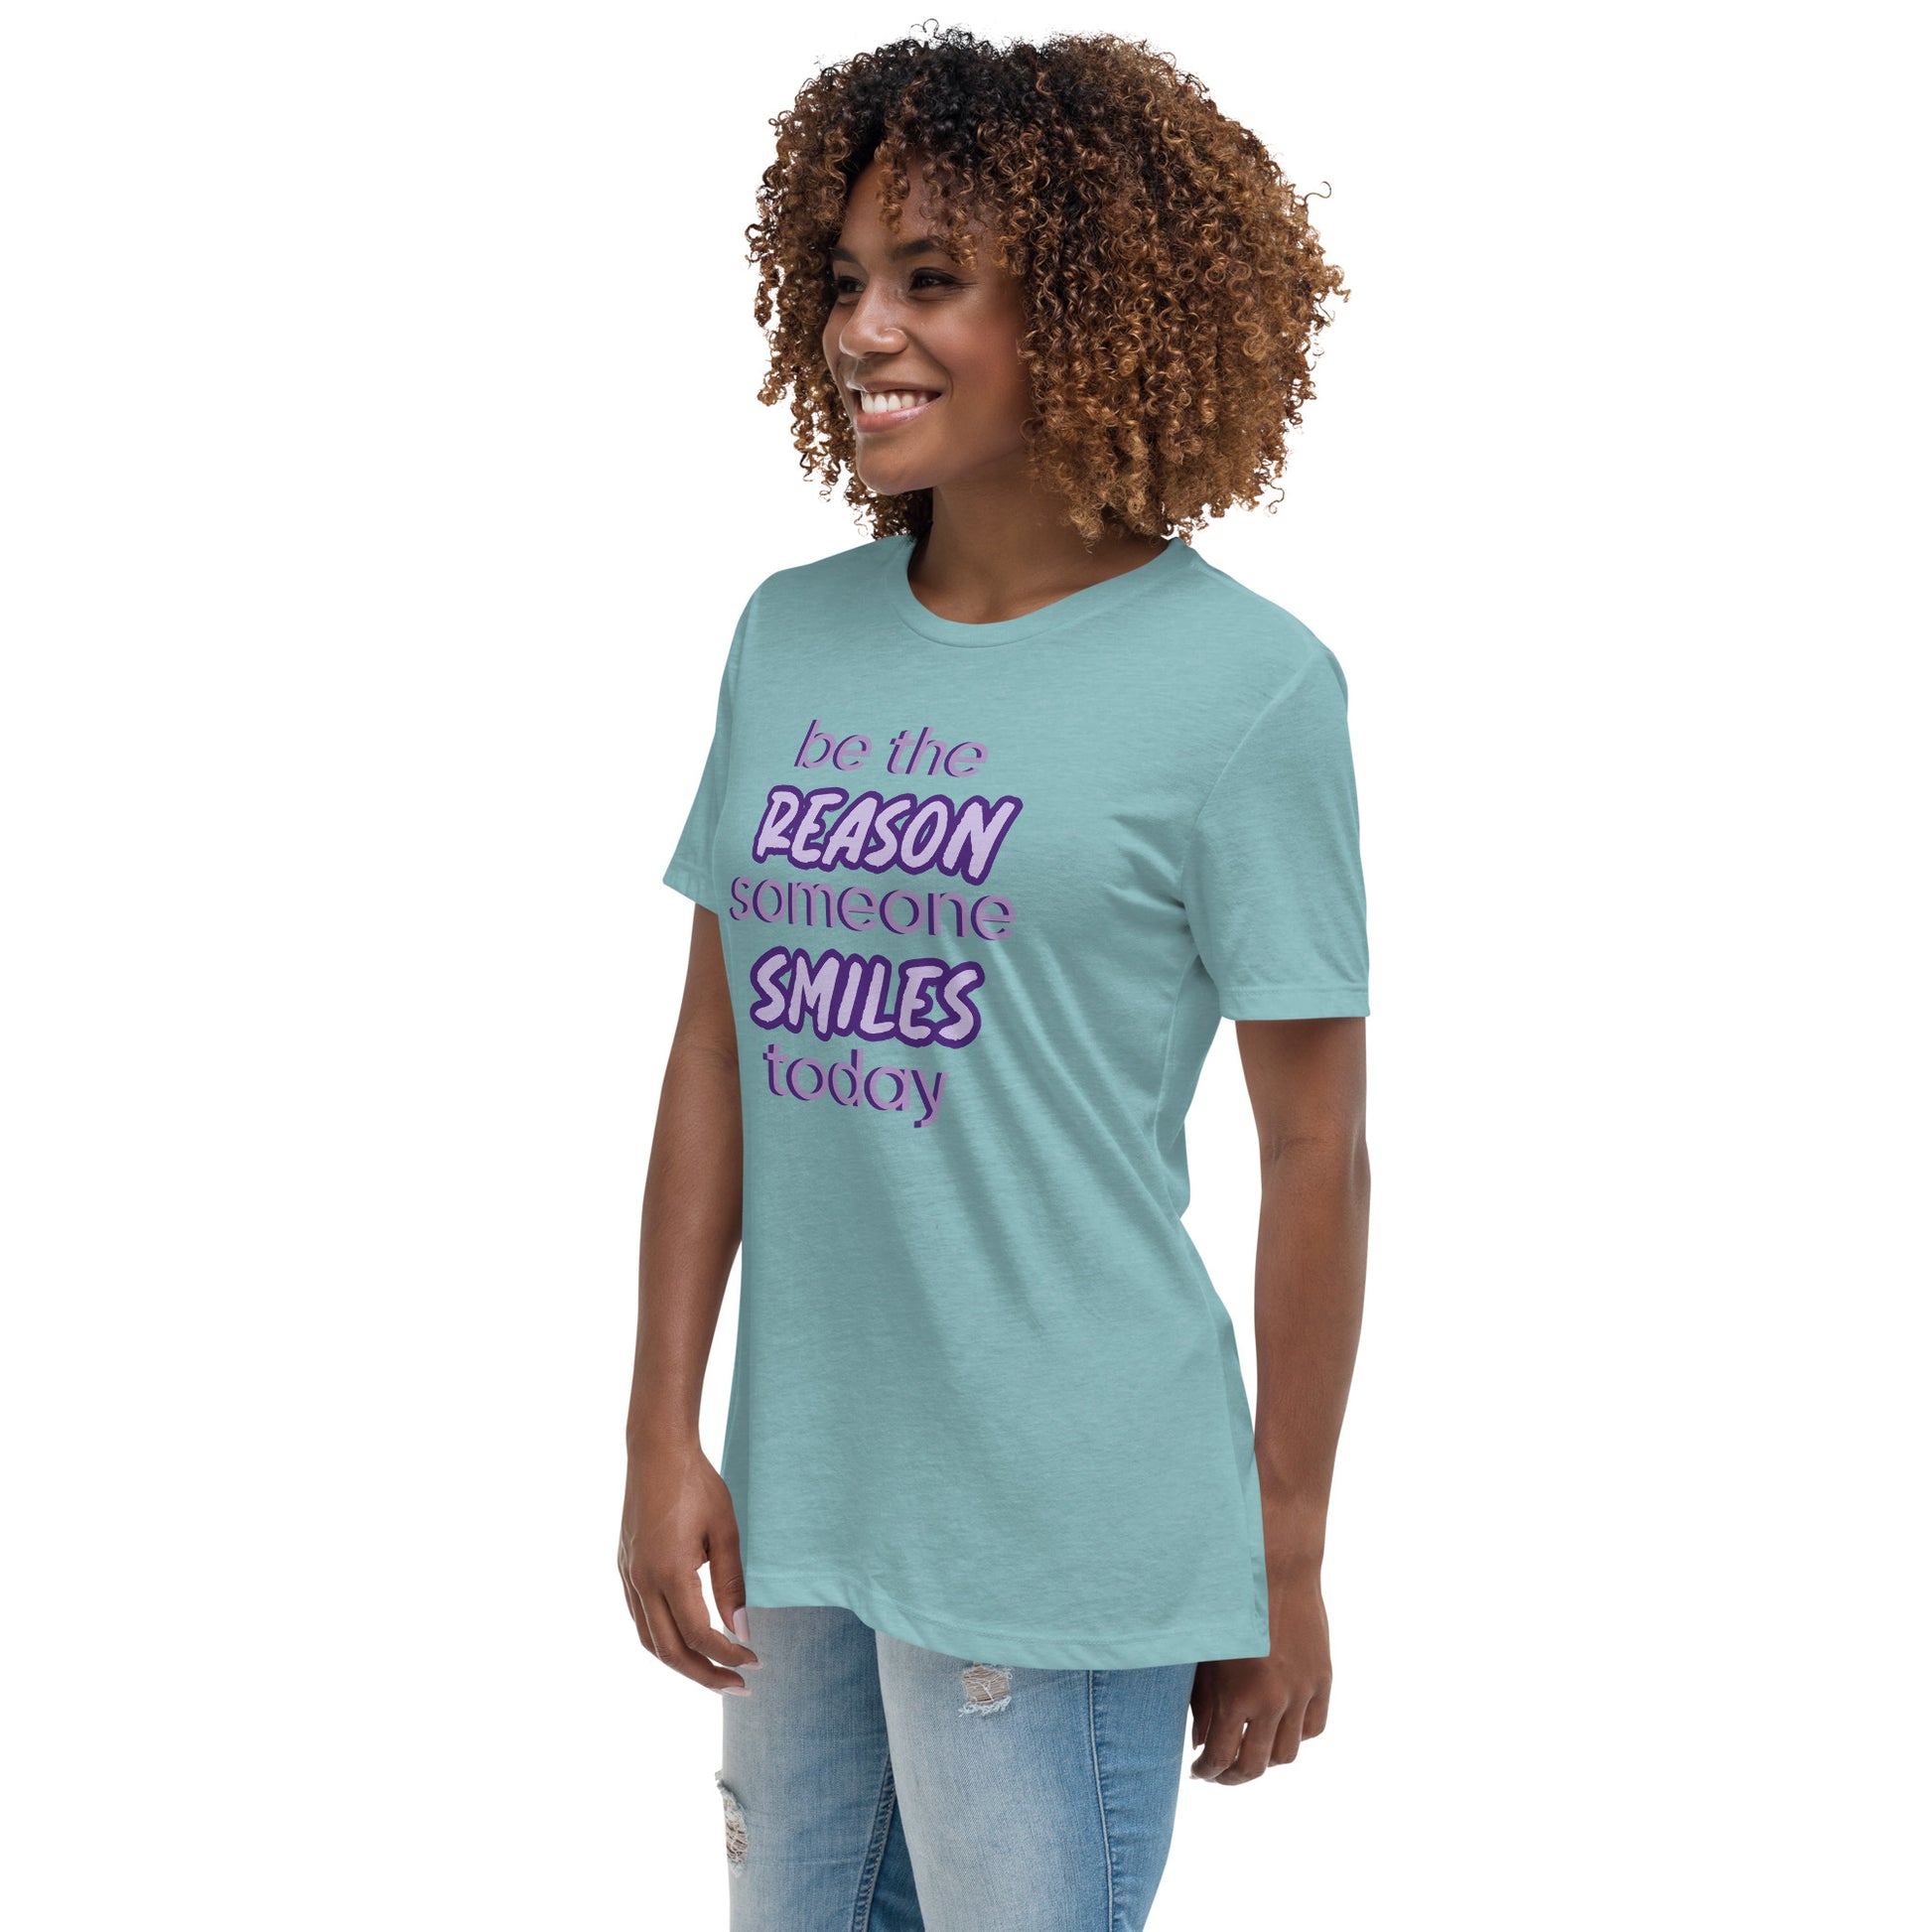 Woman with blue lagoon T-shirt and the quote "be the reason someone smiles today" in purple on it. 